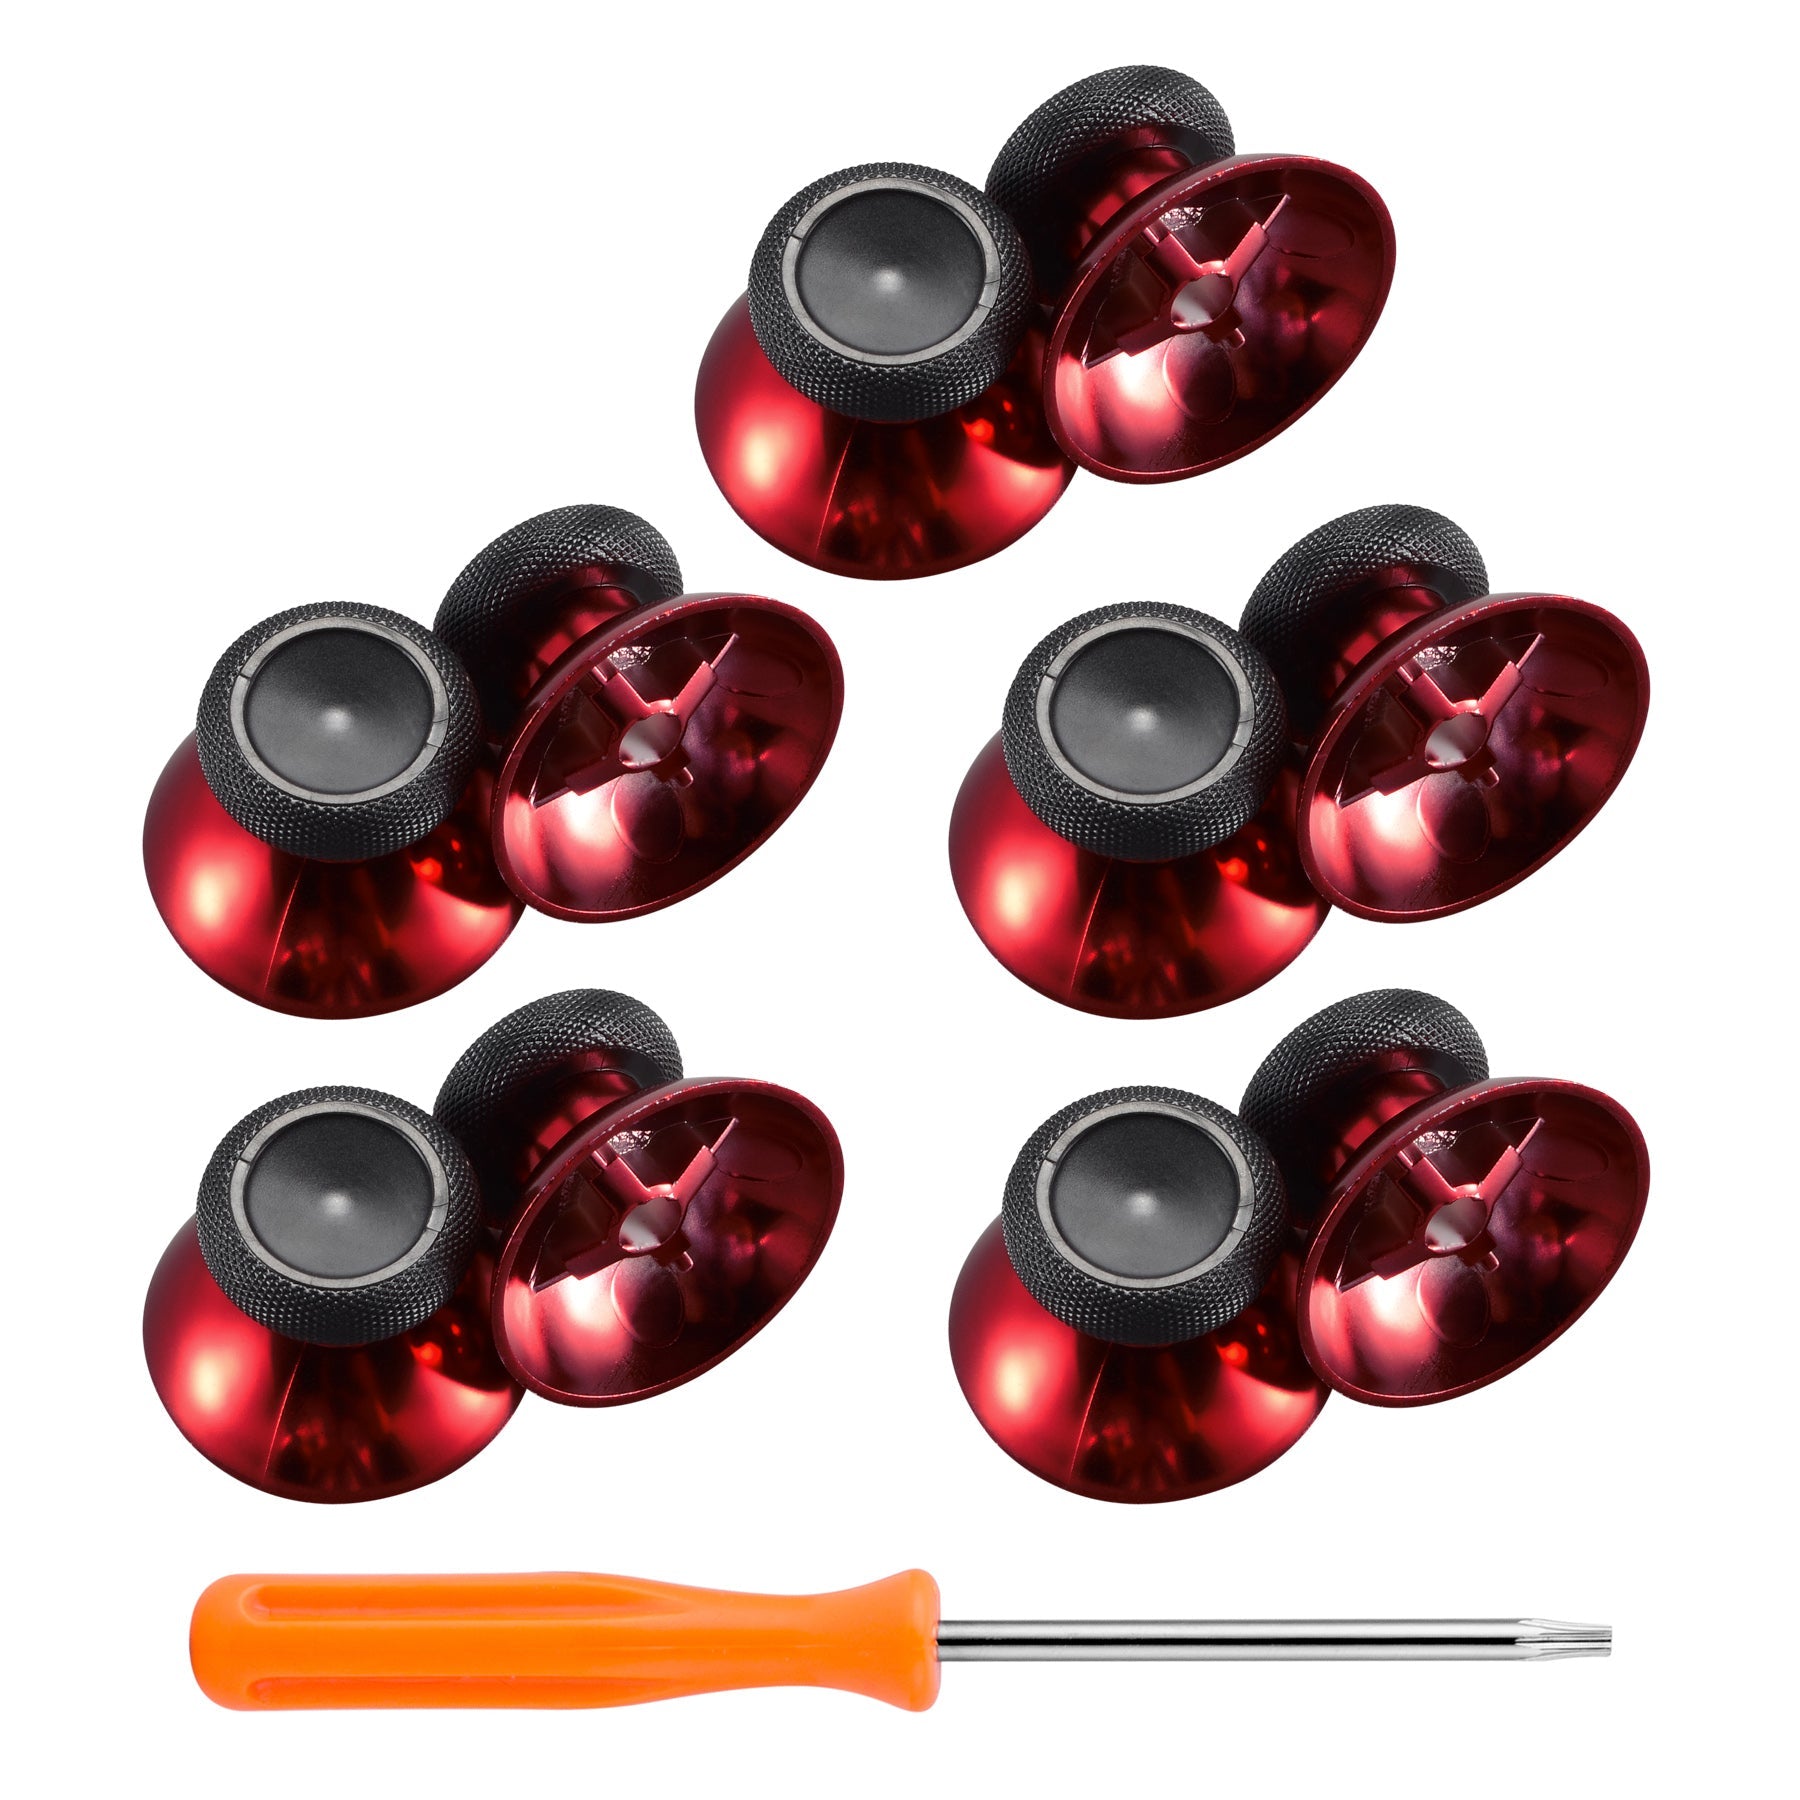 eXtremeRate Retail 10 pcs Rubberized Chrome Red Thumbsticks Buttons Analog Sticks Replacement Parts for Xbox One Xbox One S Controller - XBHK0003GC